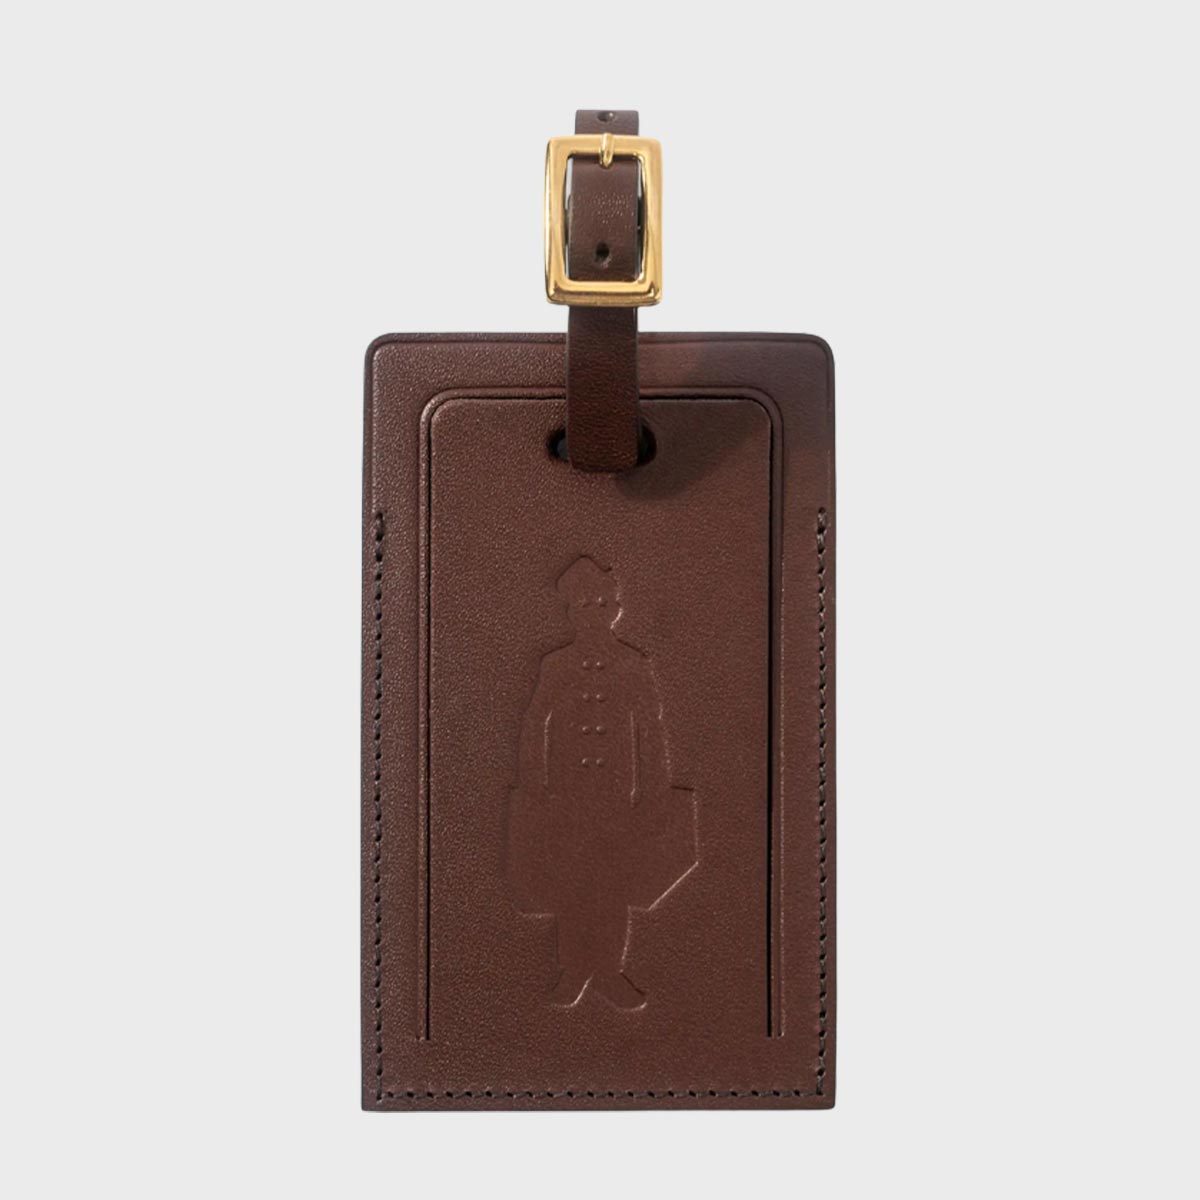 <p>Music aficionados will love this <a href="https://www.neimanmarcus.com/p/golf-le-fleur-globe-trotter-leather-luggage-tag-prod250790420" rel="noopener">Golf le Fleur luggage tag</a>, a luxury brand helmed by Tyler, the Creator. The brown buffed leather tag is debossed with a bellboy motif on the front and the brand's logo on the back. Now you just need a stylish <a href="https://www.rd.com/article/capsule-wardrobe/">capsule wardrobe</a> to match.</p> <p class="listicle-page__cta-button-shop">Shop Now</p>